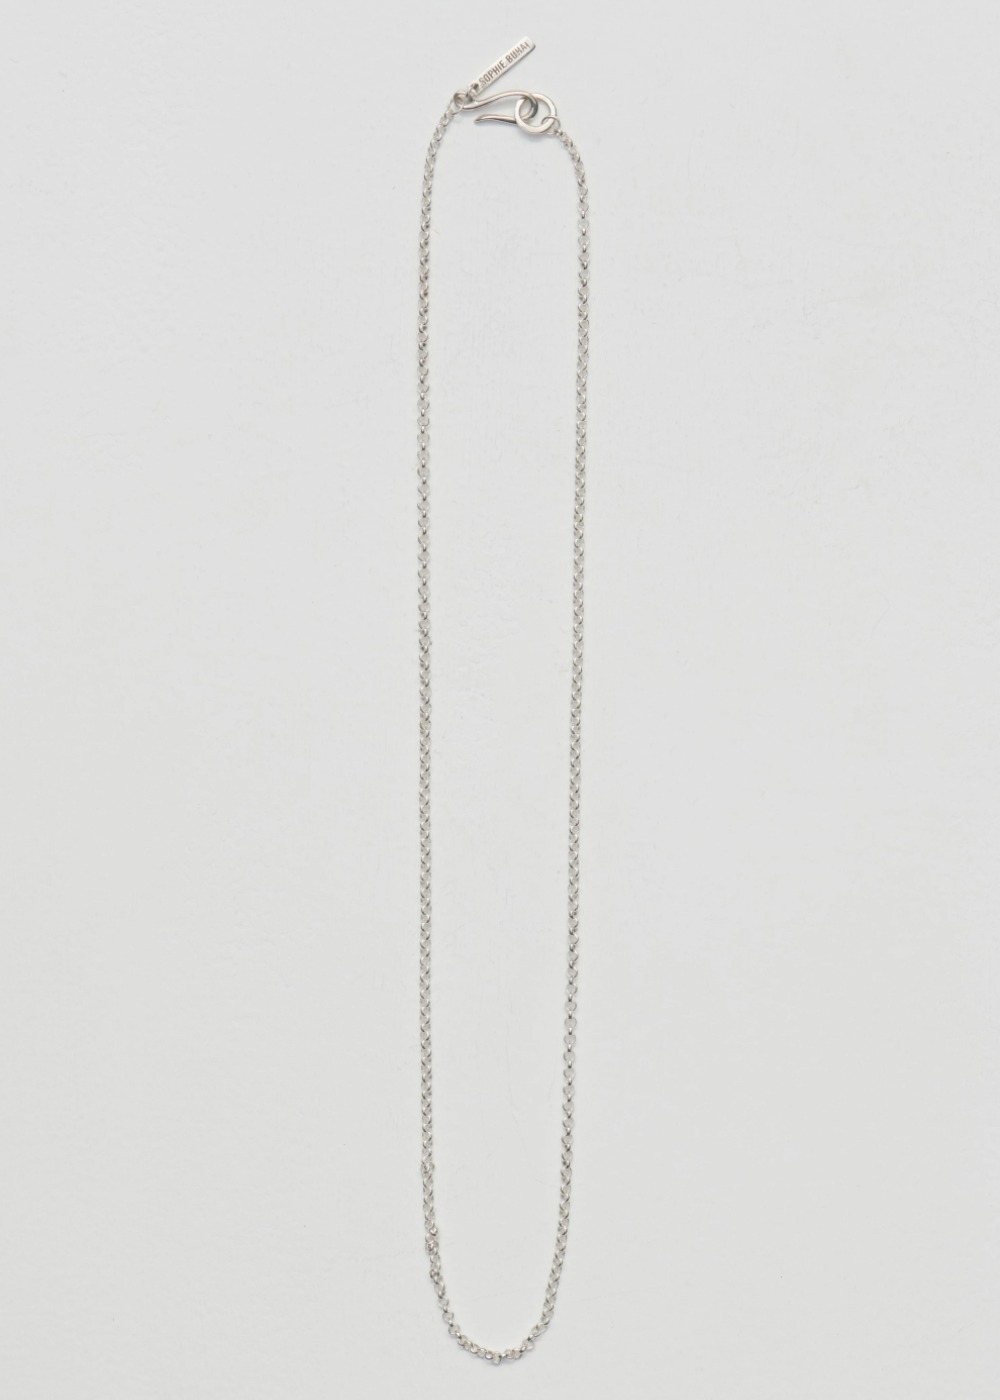 Nage Chain Necklace